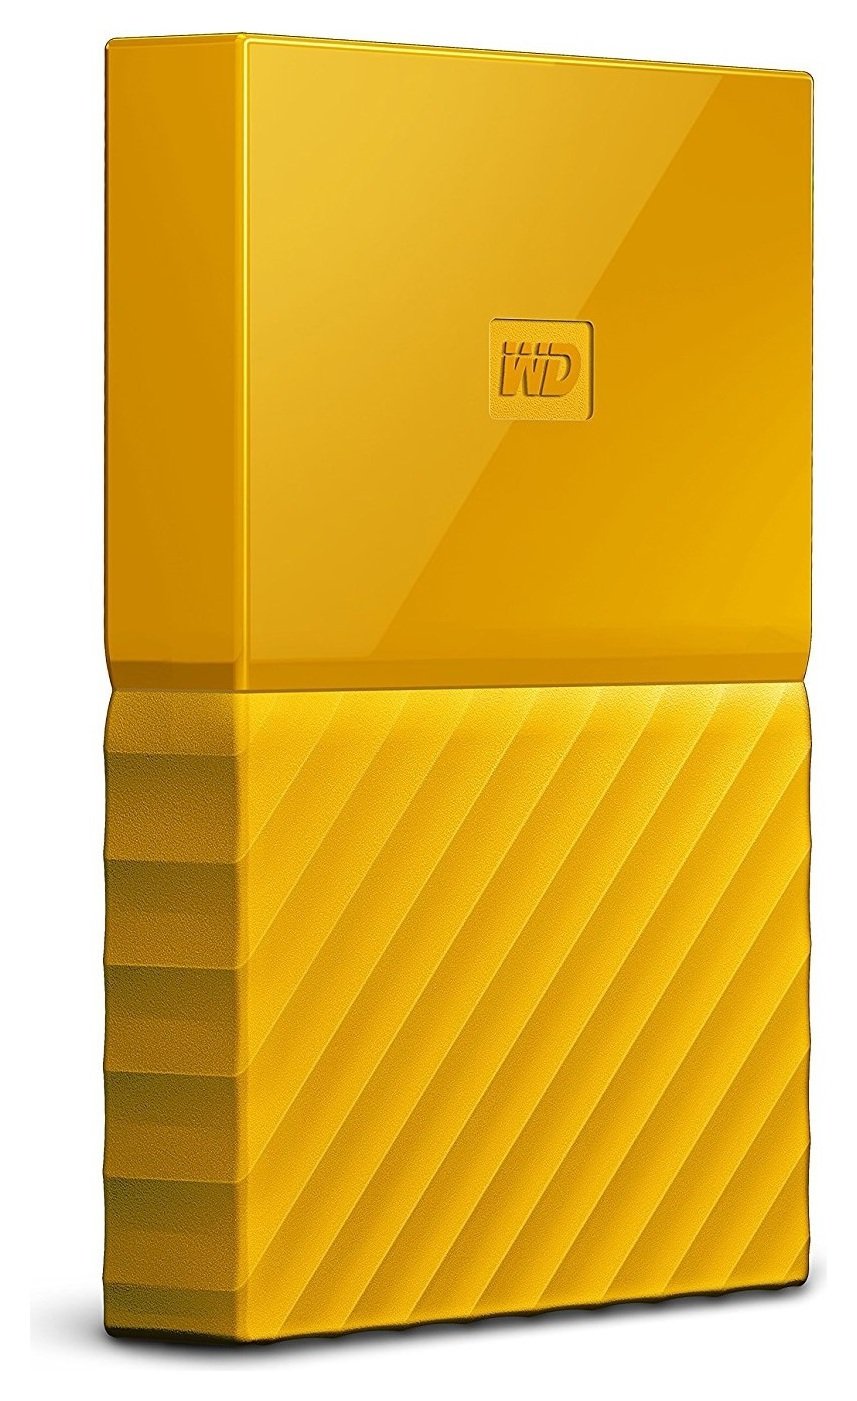 WD 1TB My Passport Yellow Review Review Electronics